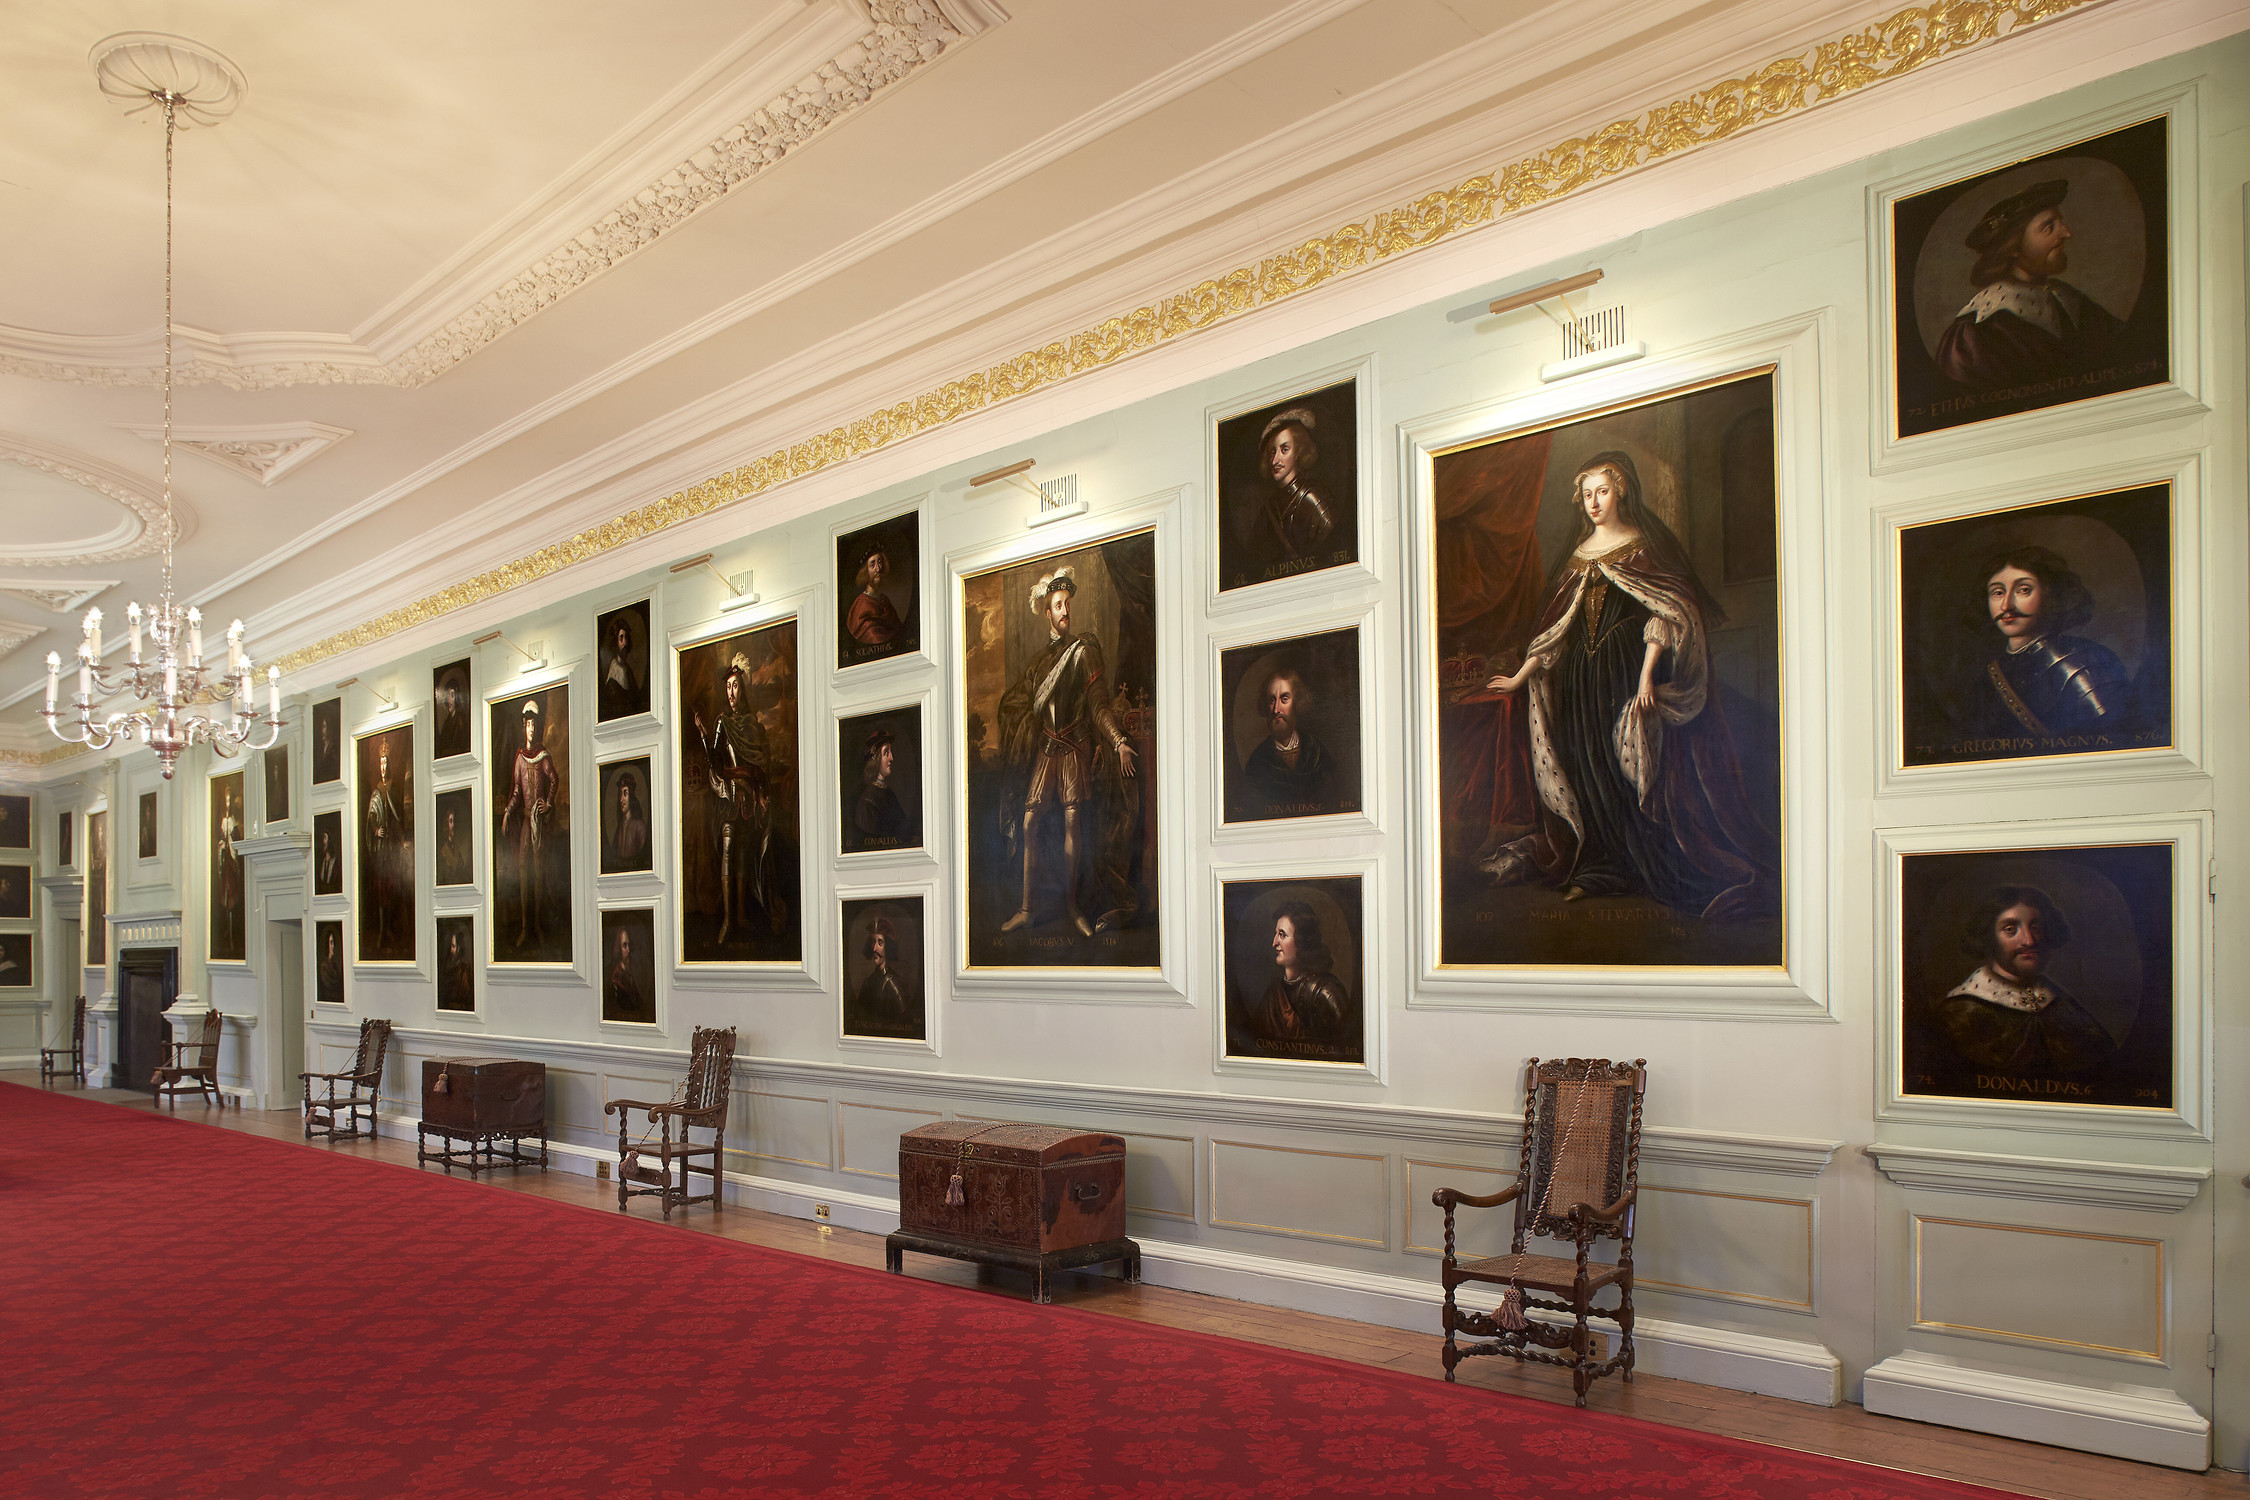 Great Gallery at the Palace of Holyroodhouse